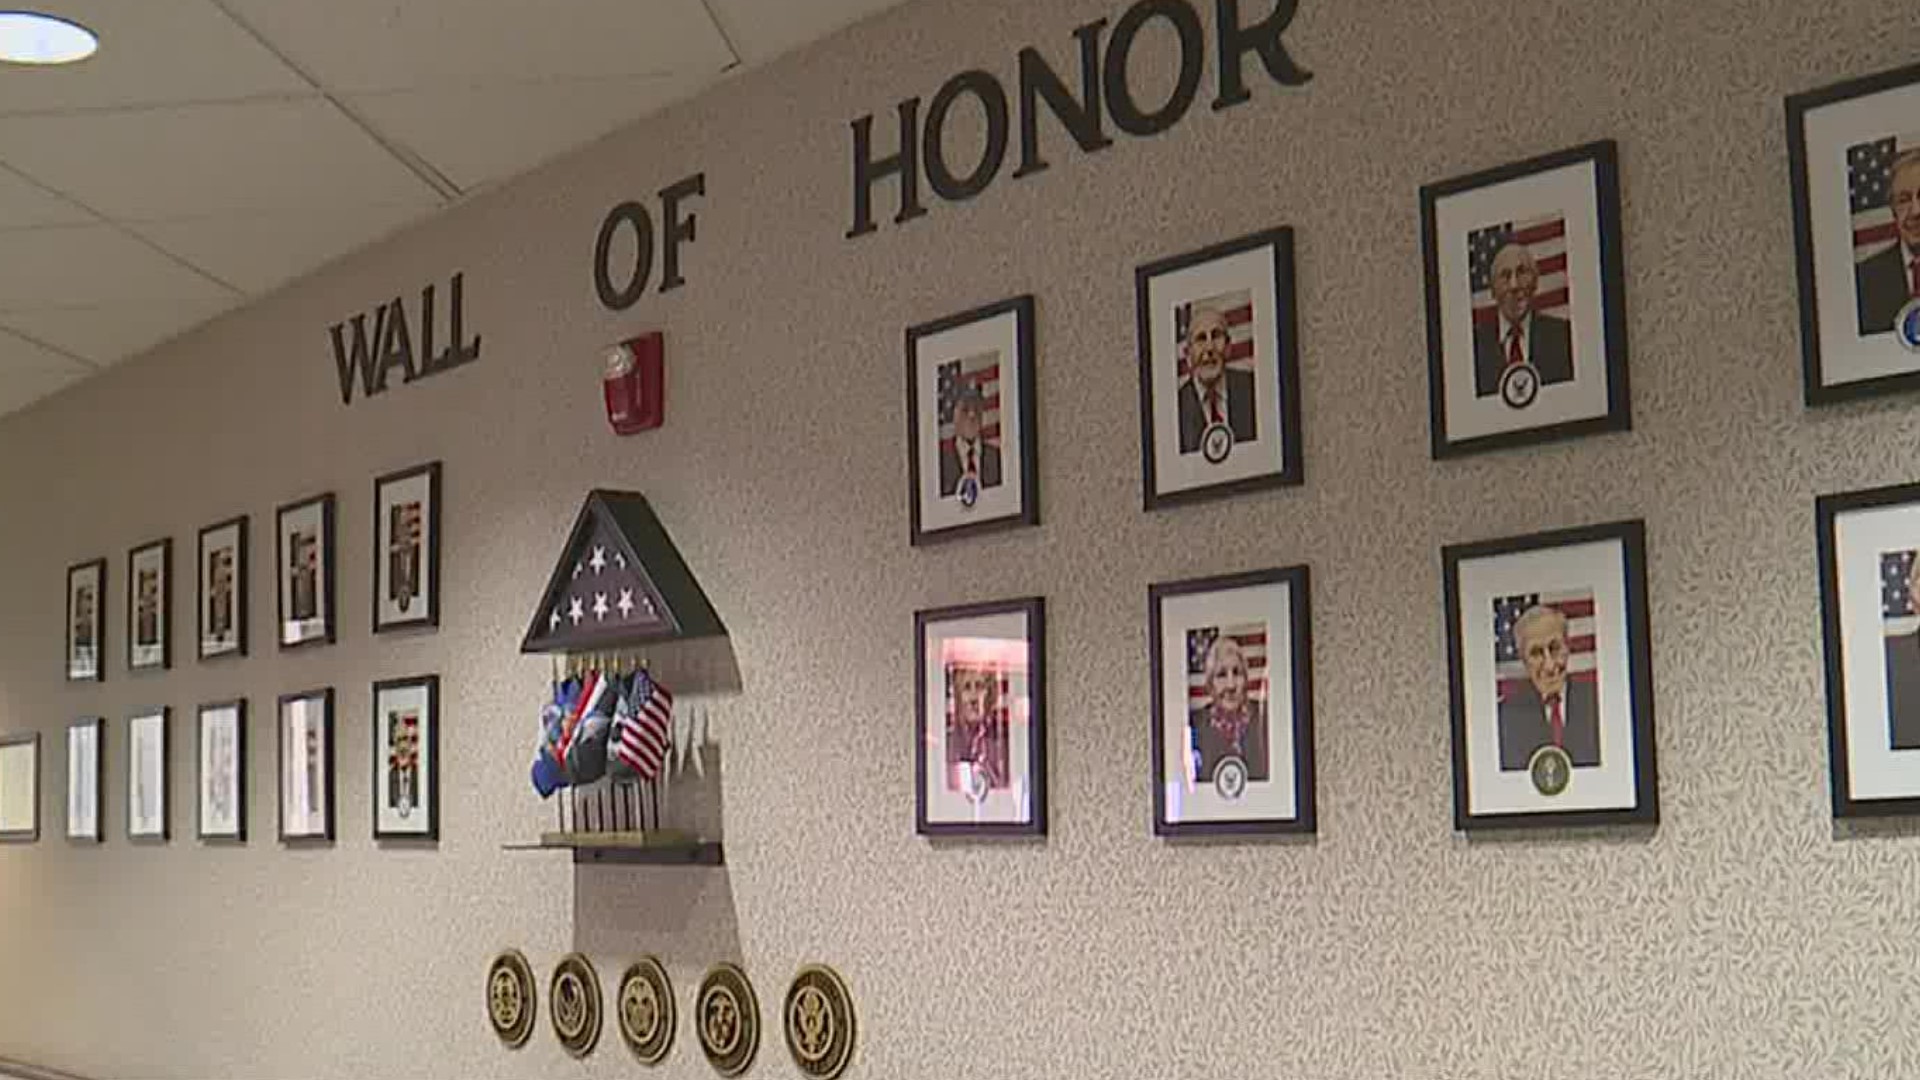 The Bridges at Brent Creek in Silver Spring Township held their honor wall dedication ceremony for more than 20 veterans that live at their senior home.